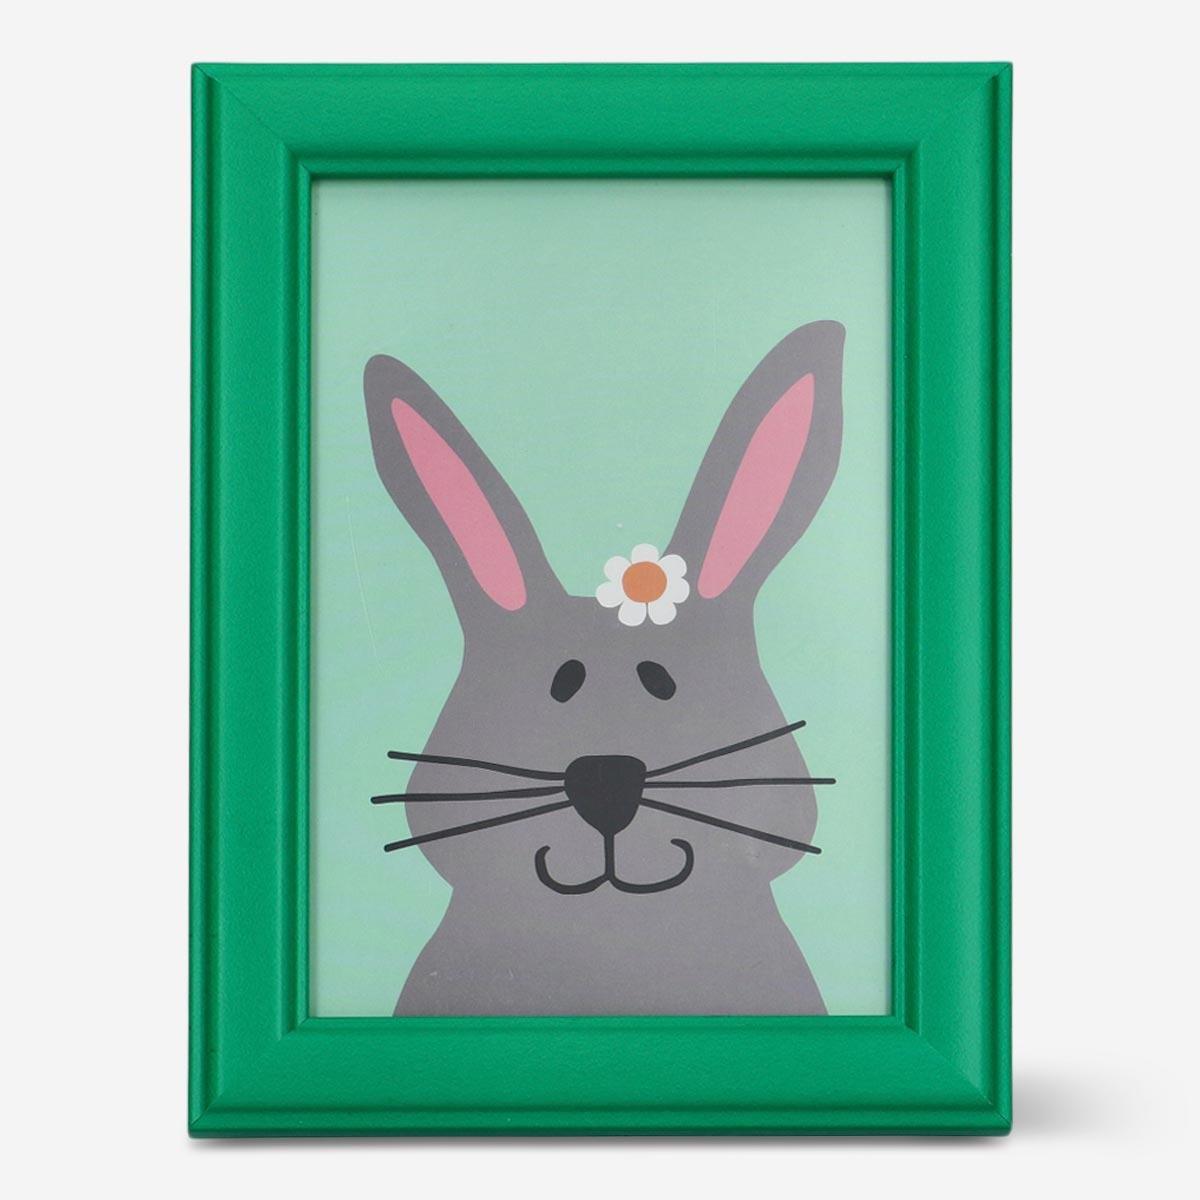 Turquoise picture frame. a6